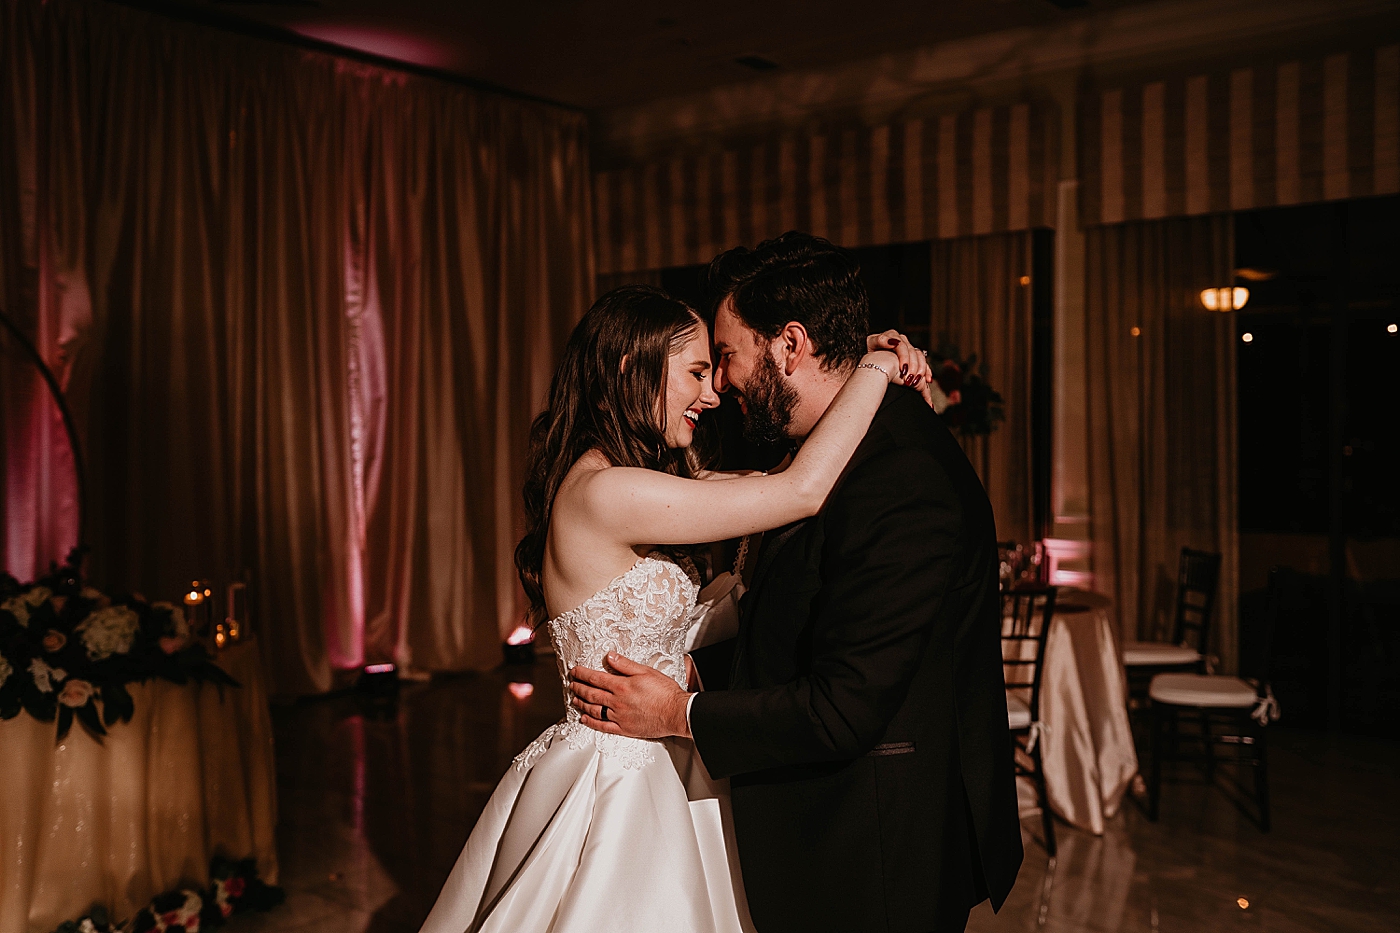 Bride and Groom sharing intimate dance Breakers West Wedding Photography captured by South Florida Wedding Photographer Krystal Capone Photography 